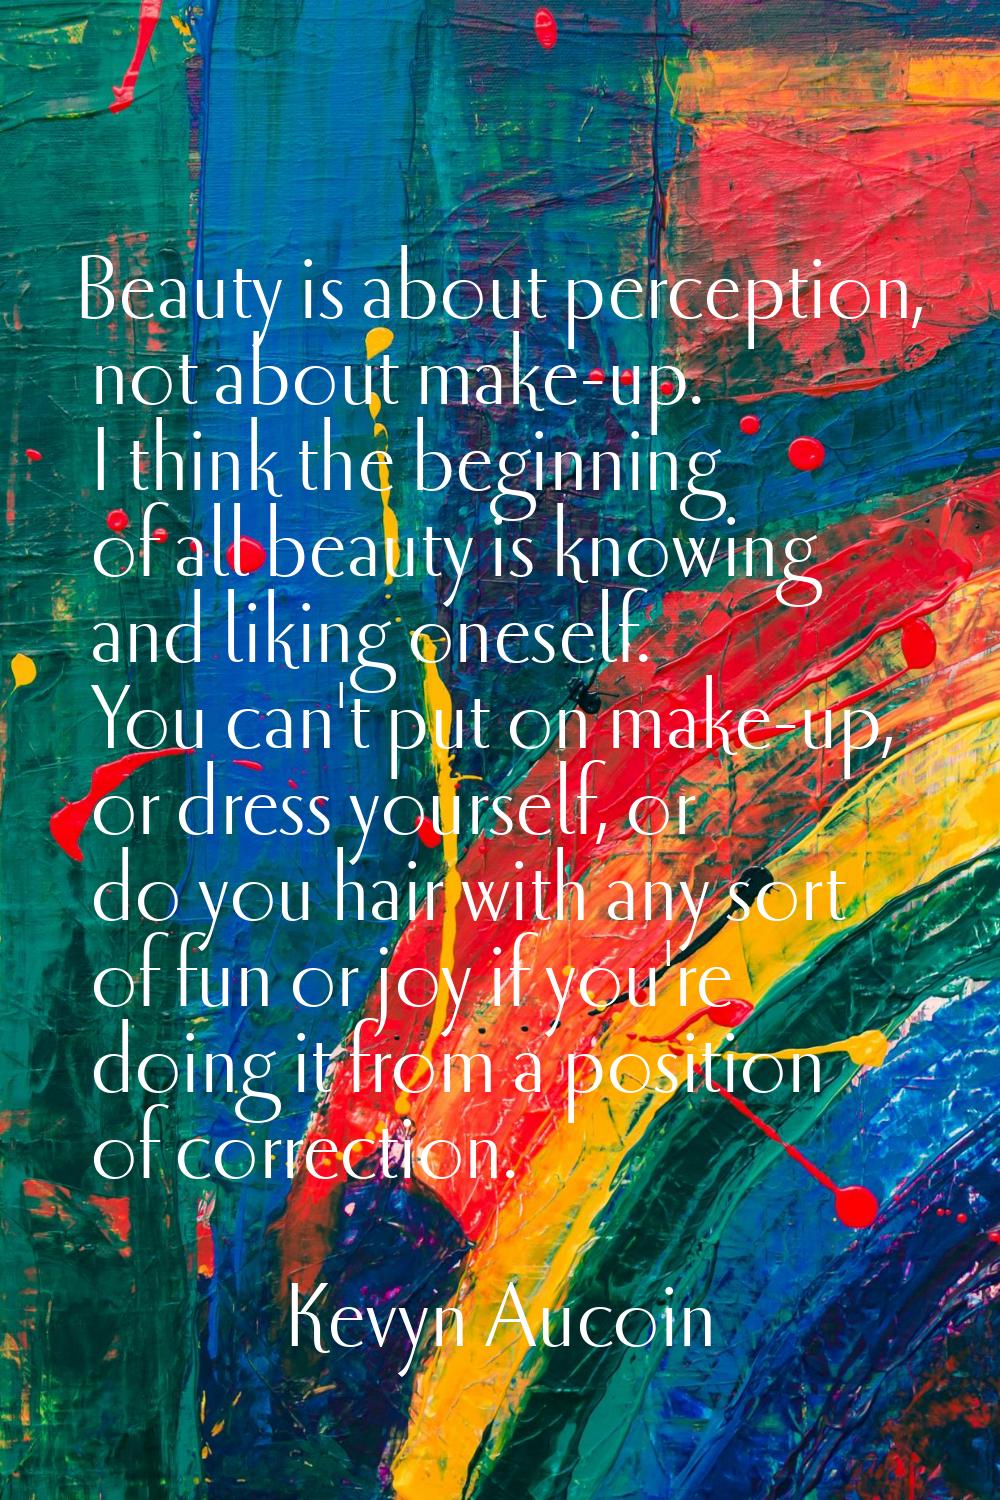 Beauty is about perception, not about make-up. I think the beginning of all beauty is knowing and l